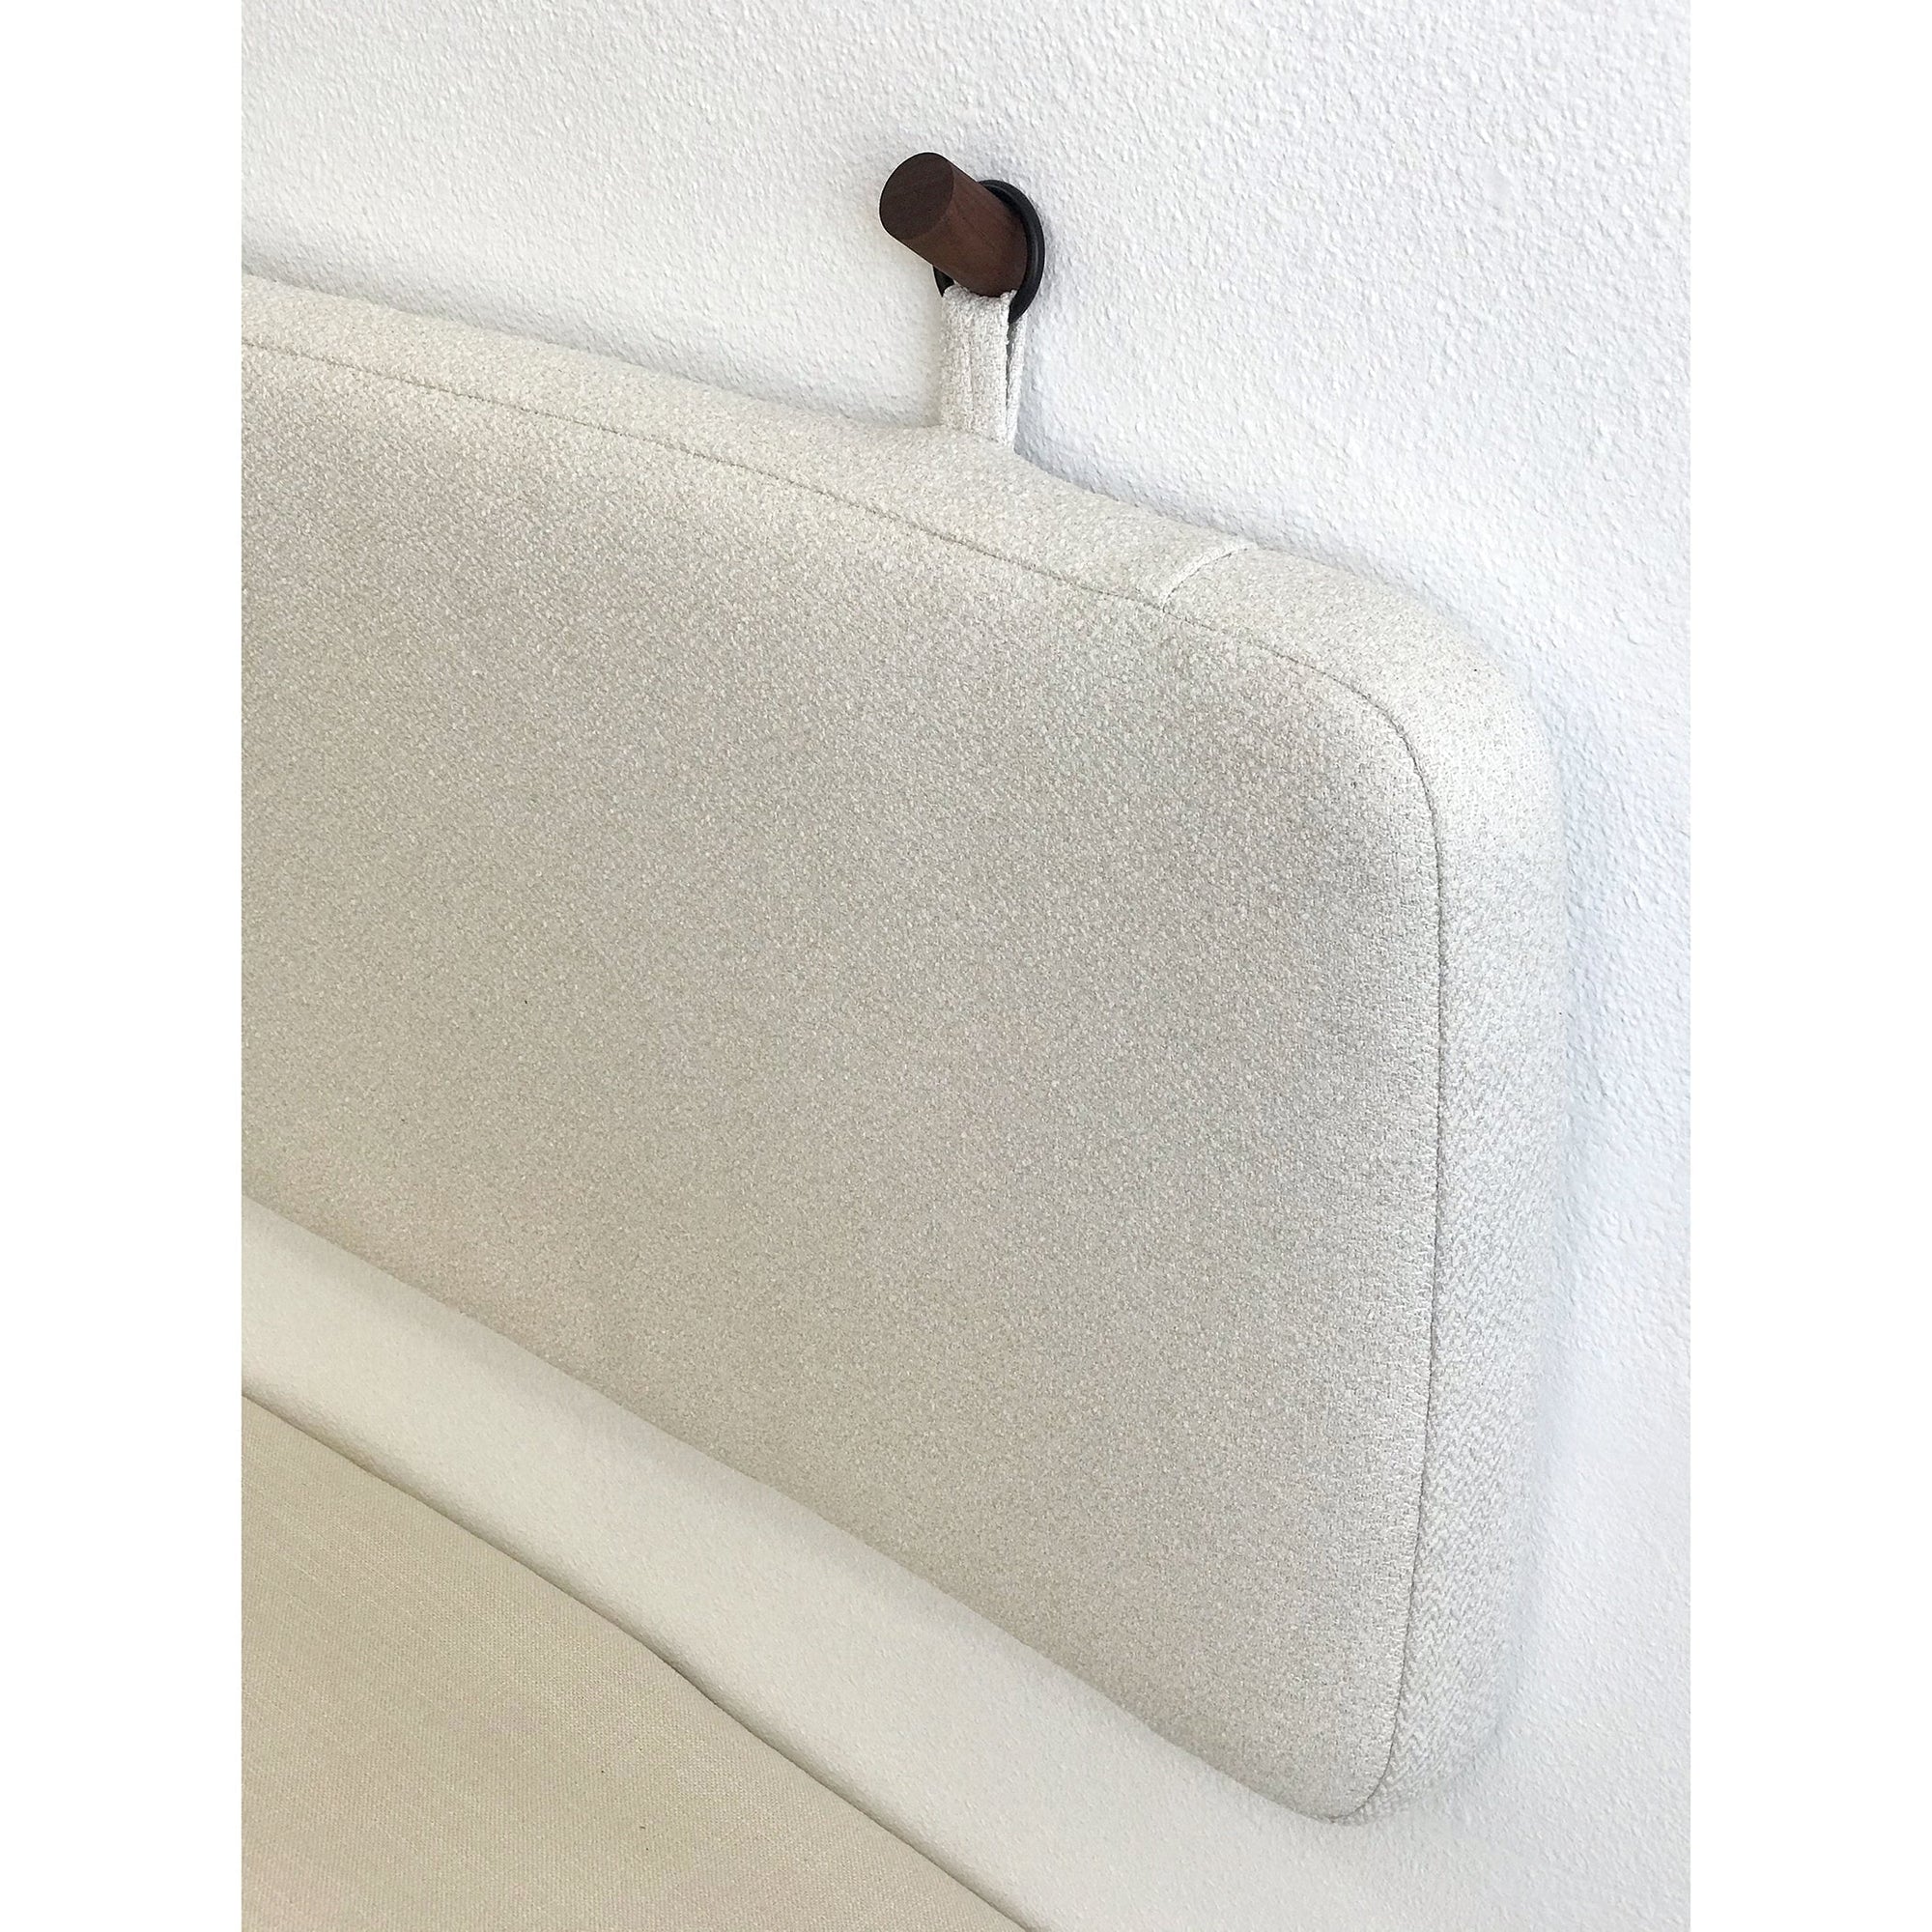 Single Size - Wall Hung Headboard or Backrest Cushion with Rings - Multiple Options